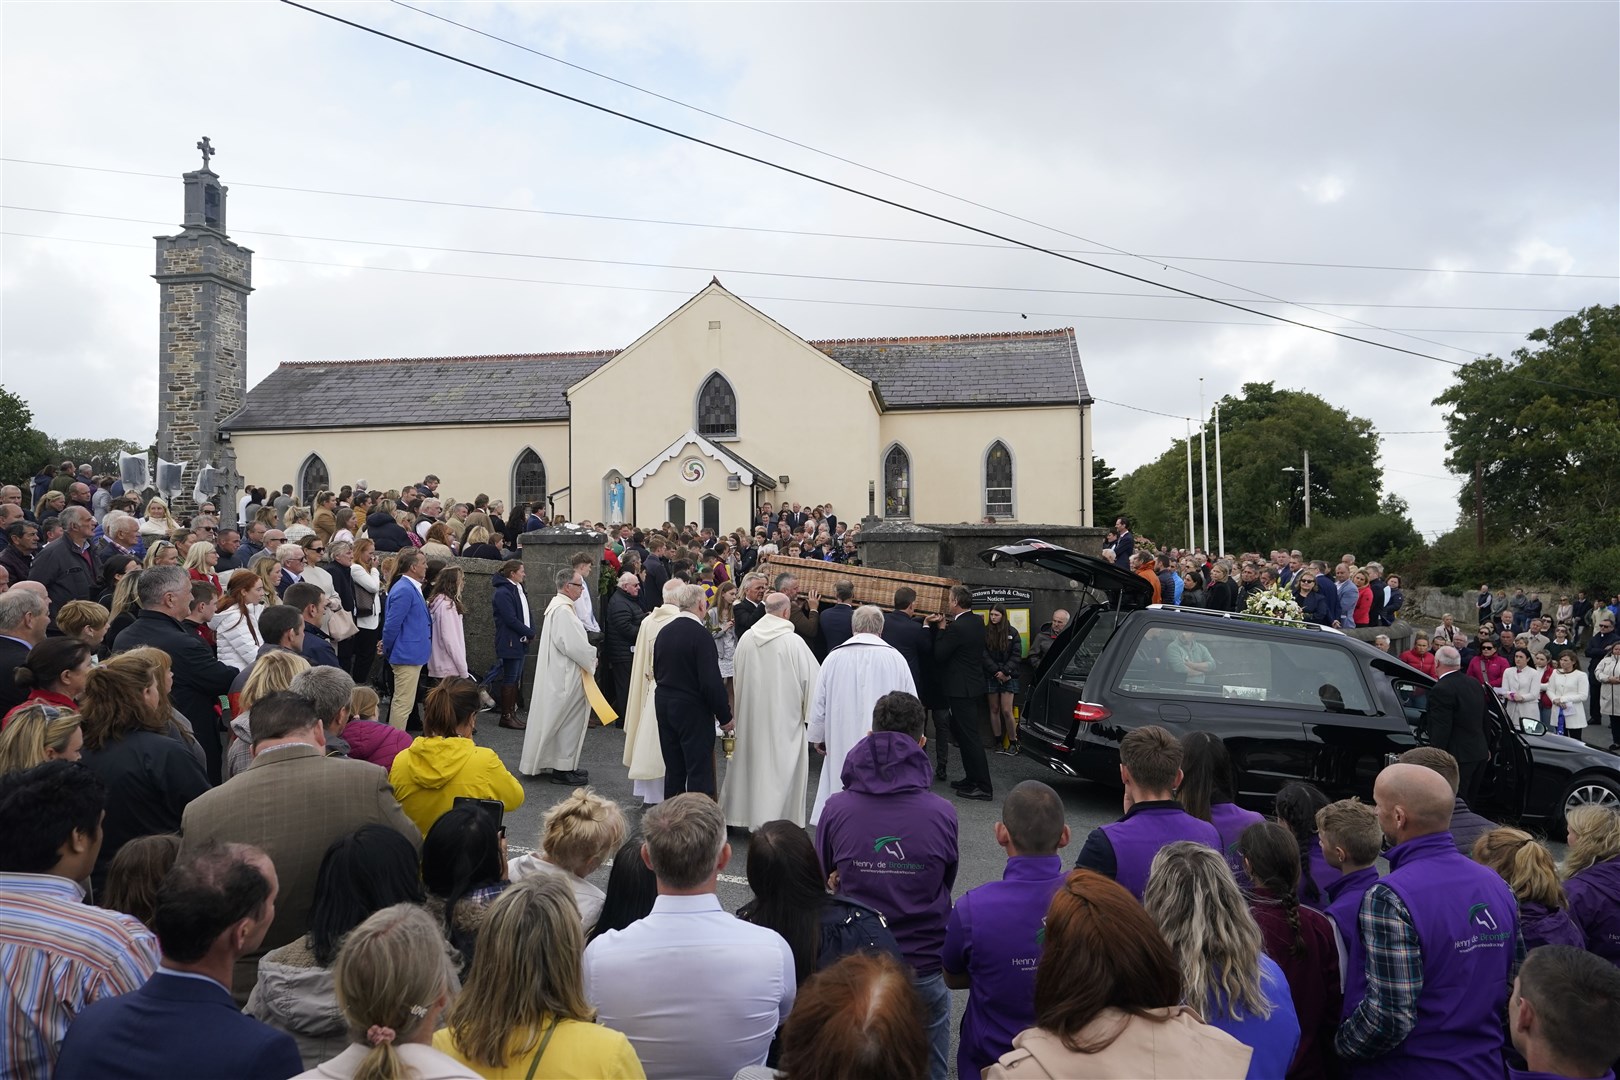 Hundreds of people attended the service (Niall Carson)